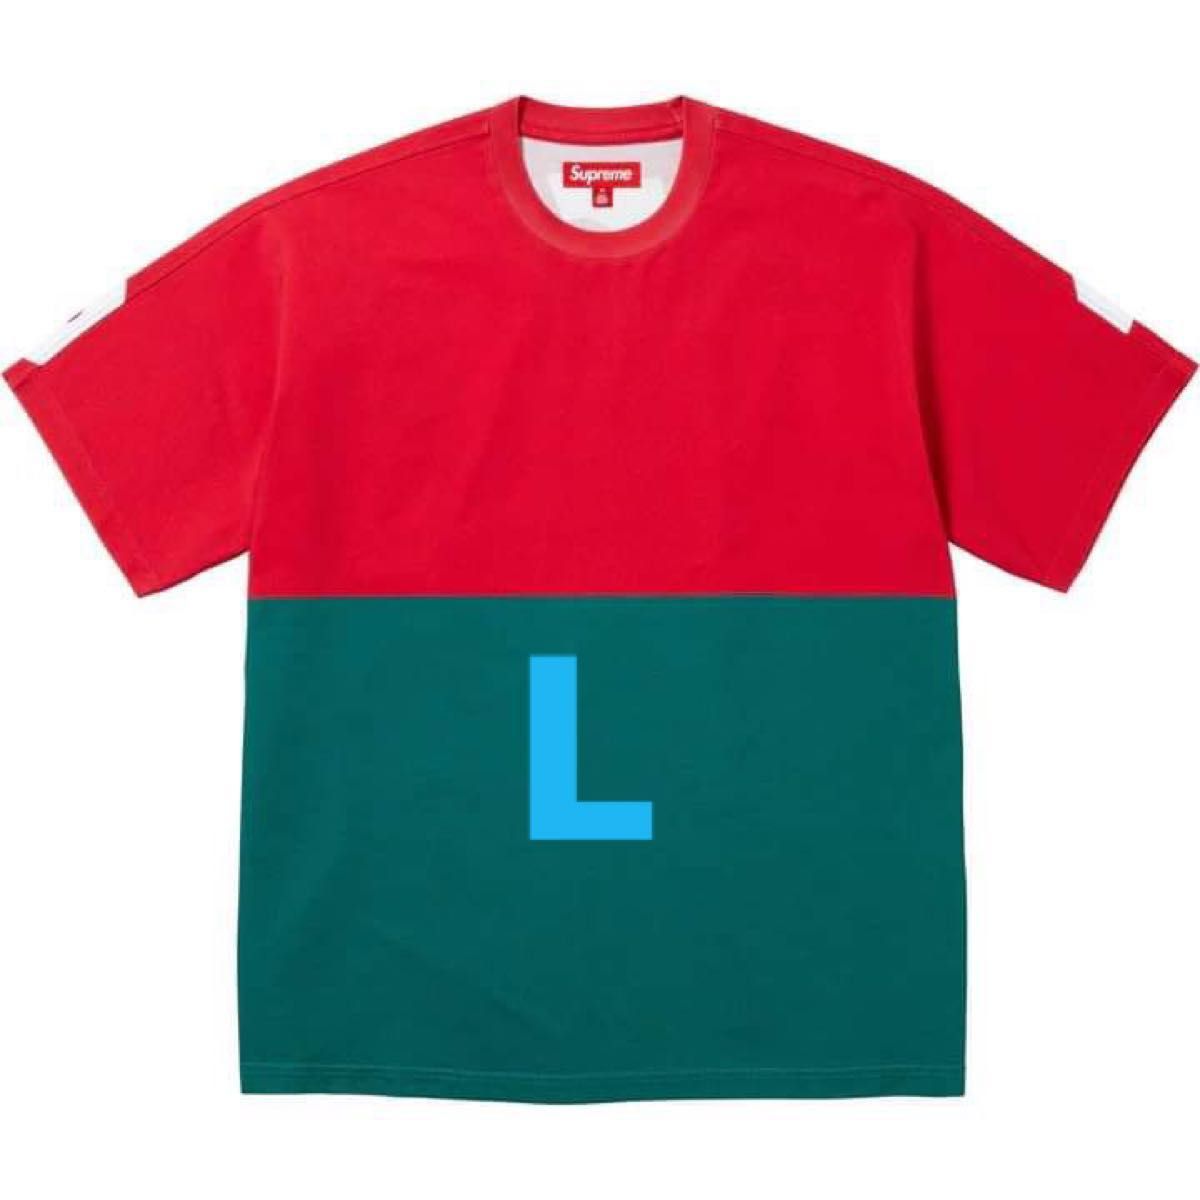 Supreme Split S/S Top - Red｜PayPayフリマ